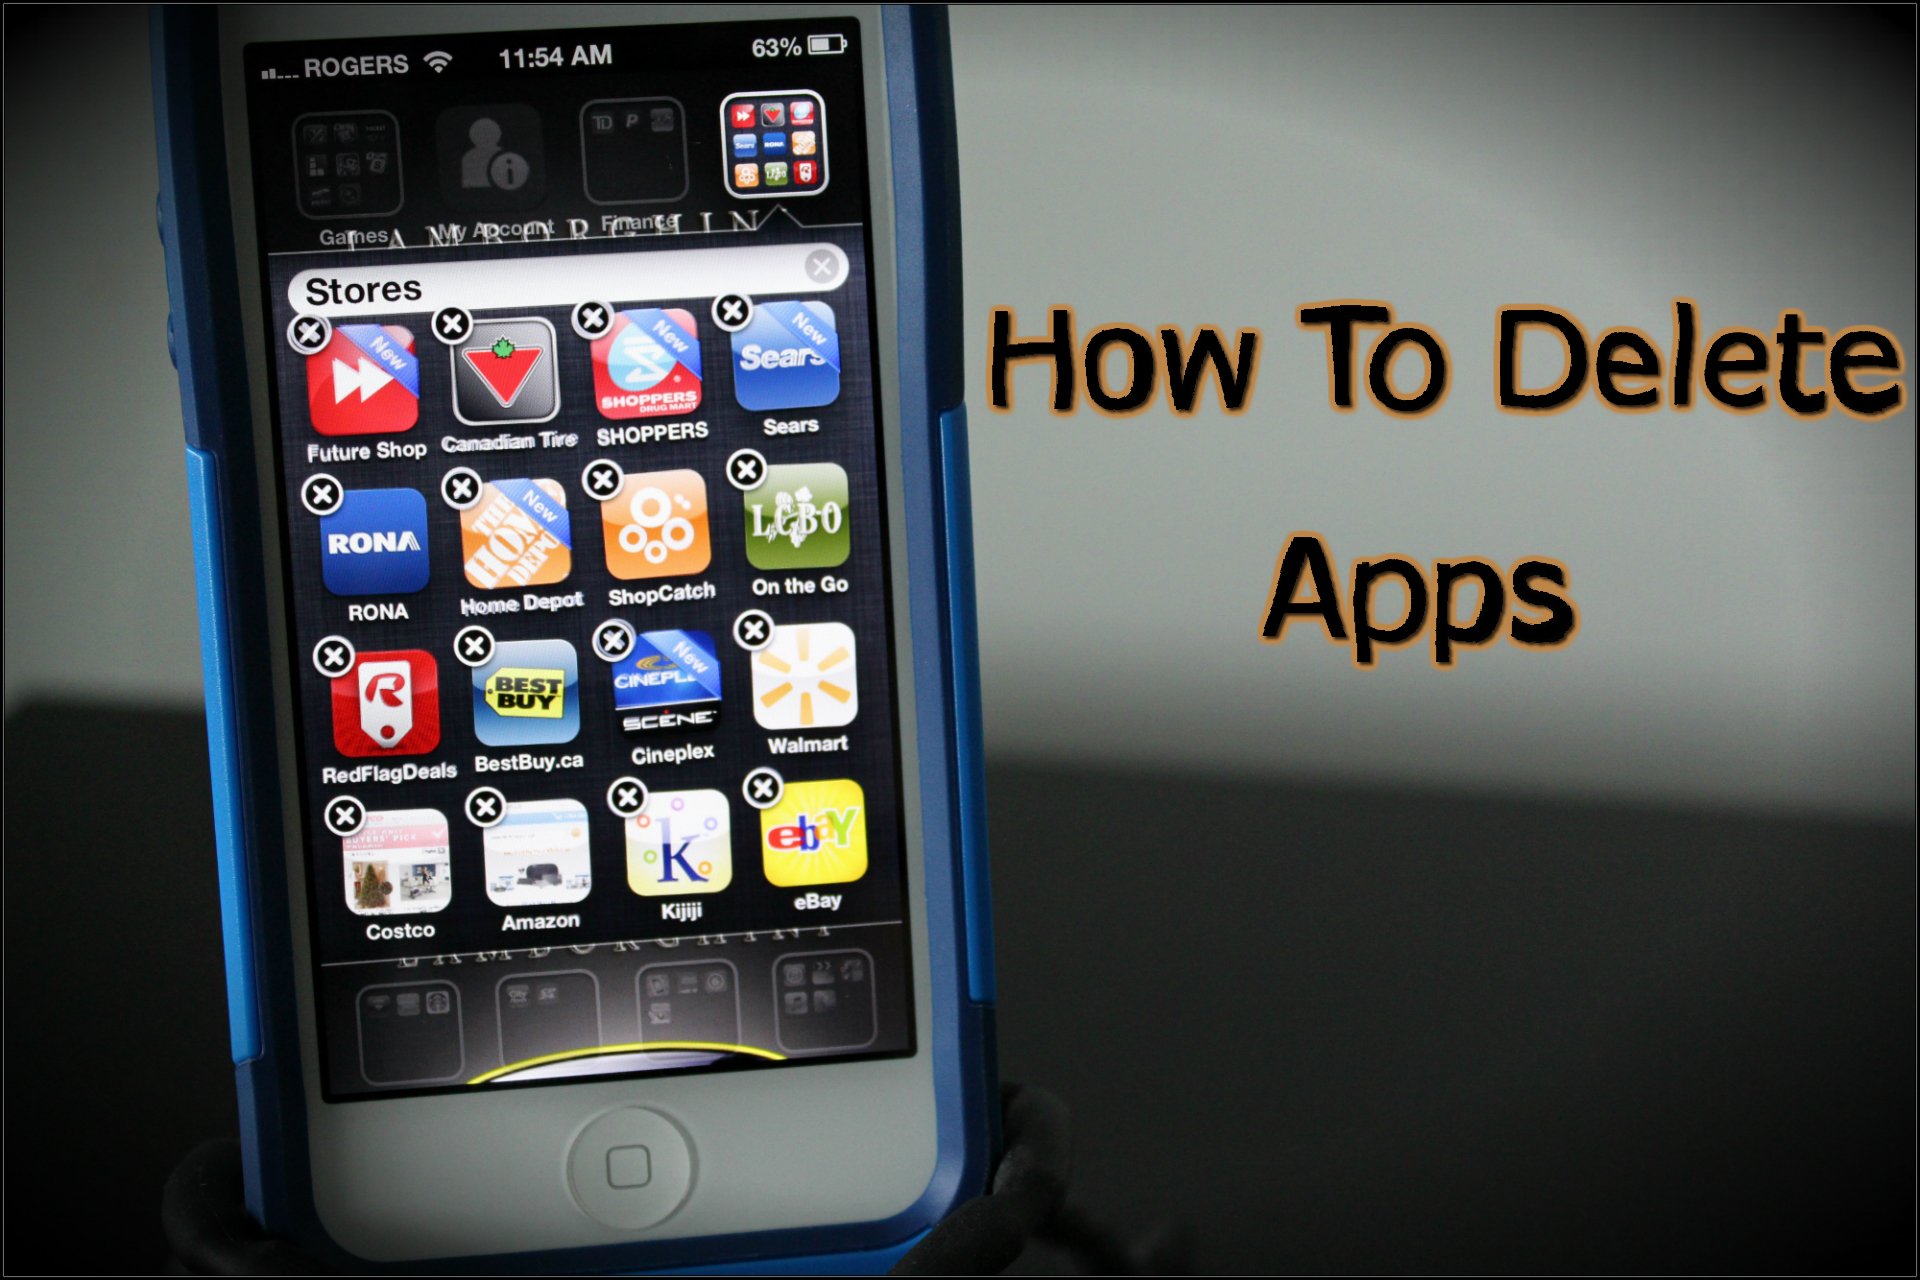 How To Delete Apps On the iPhone 5, 4s and 4